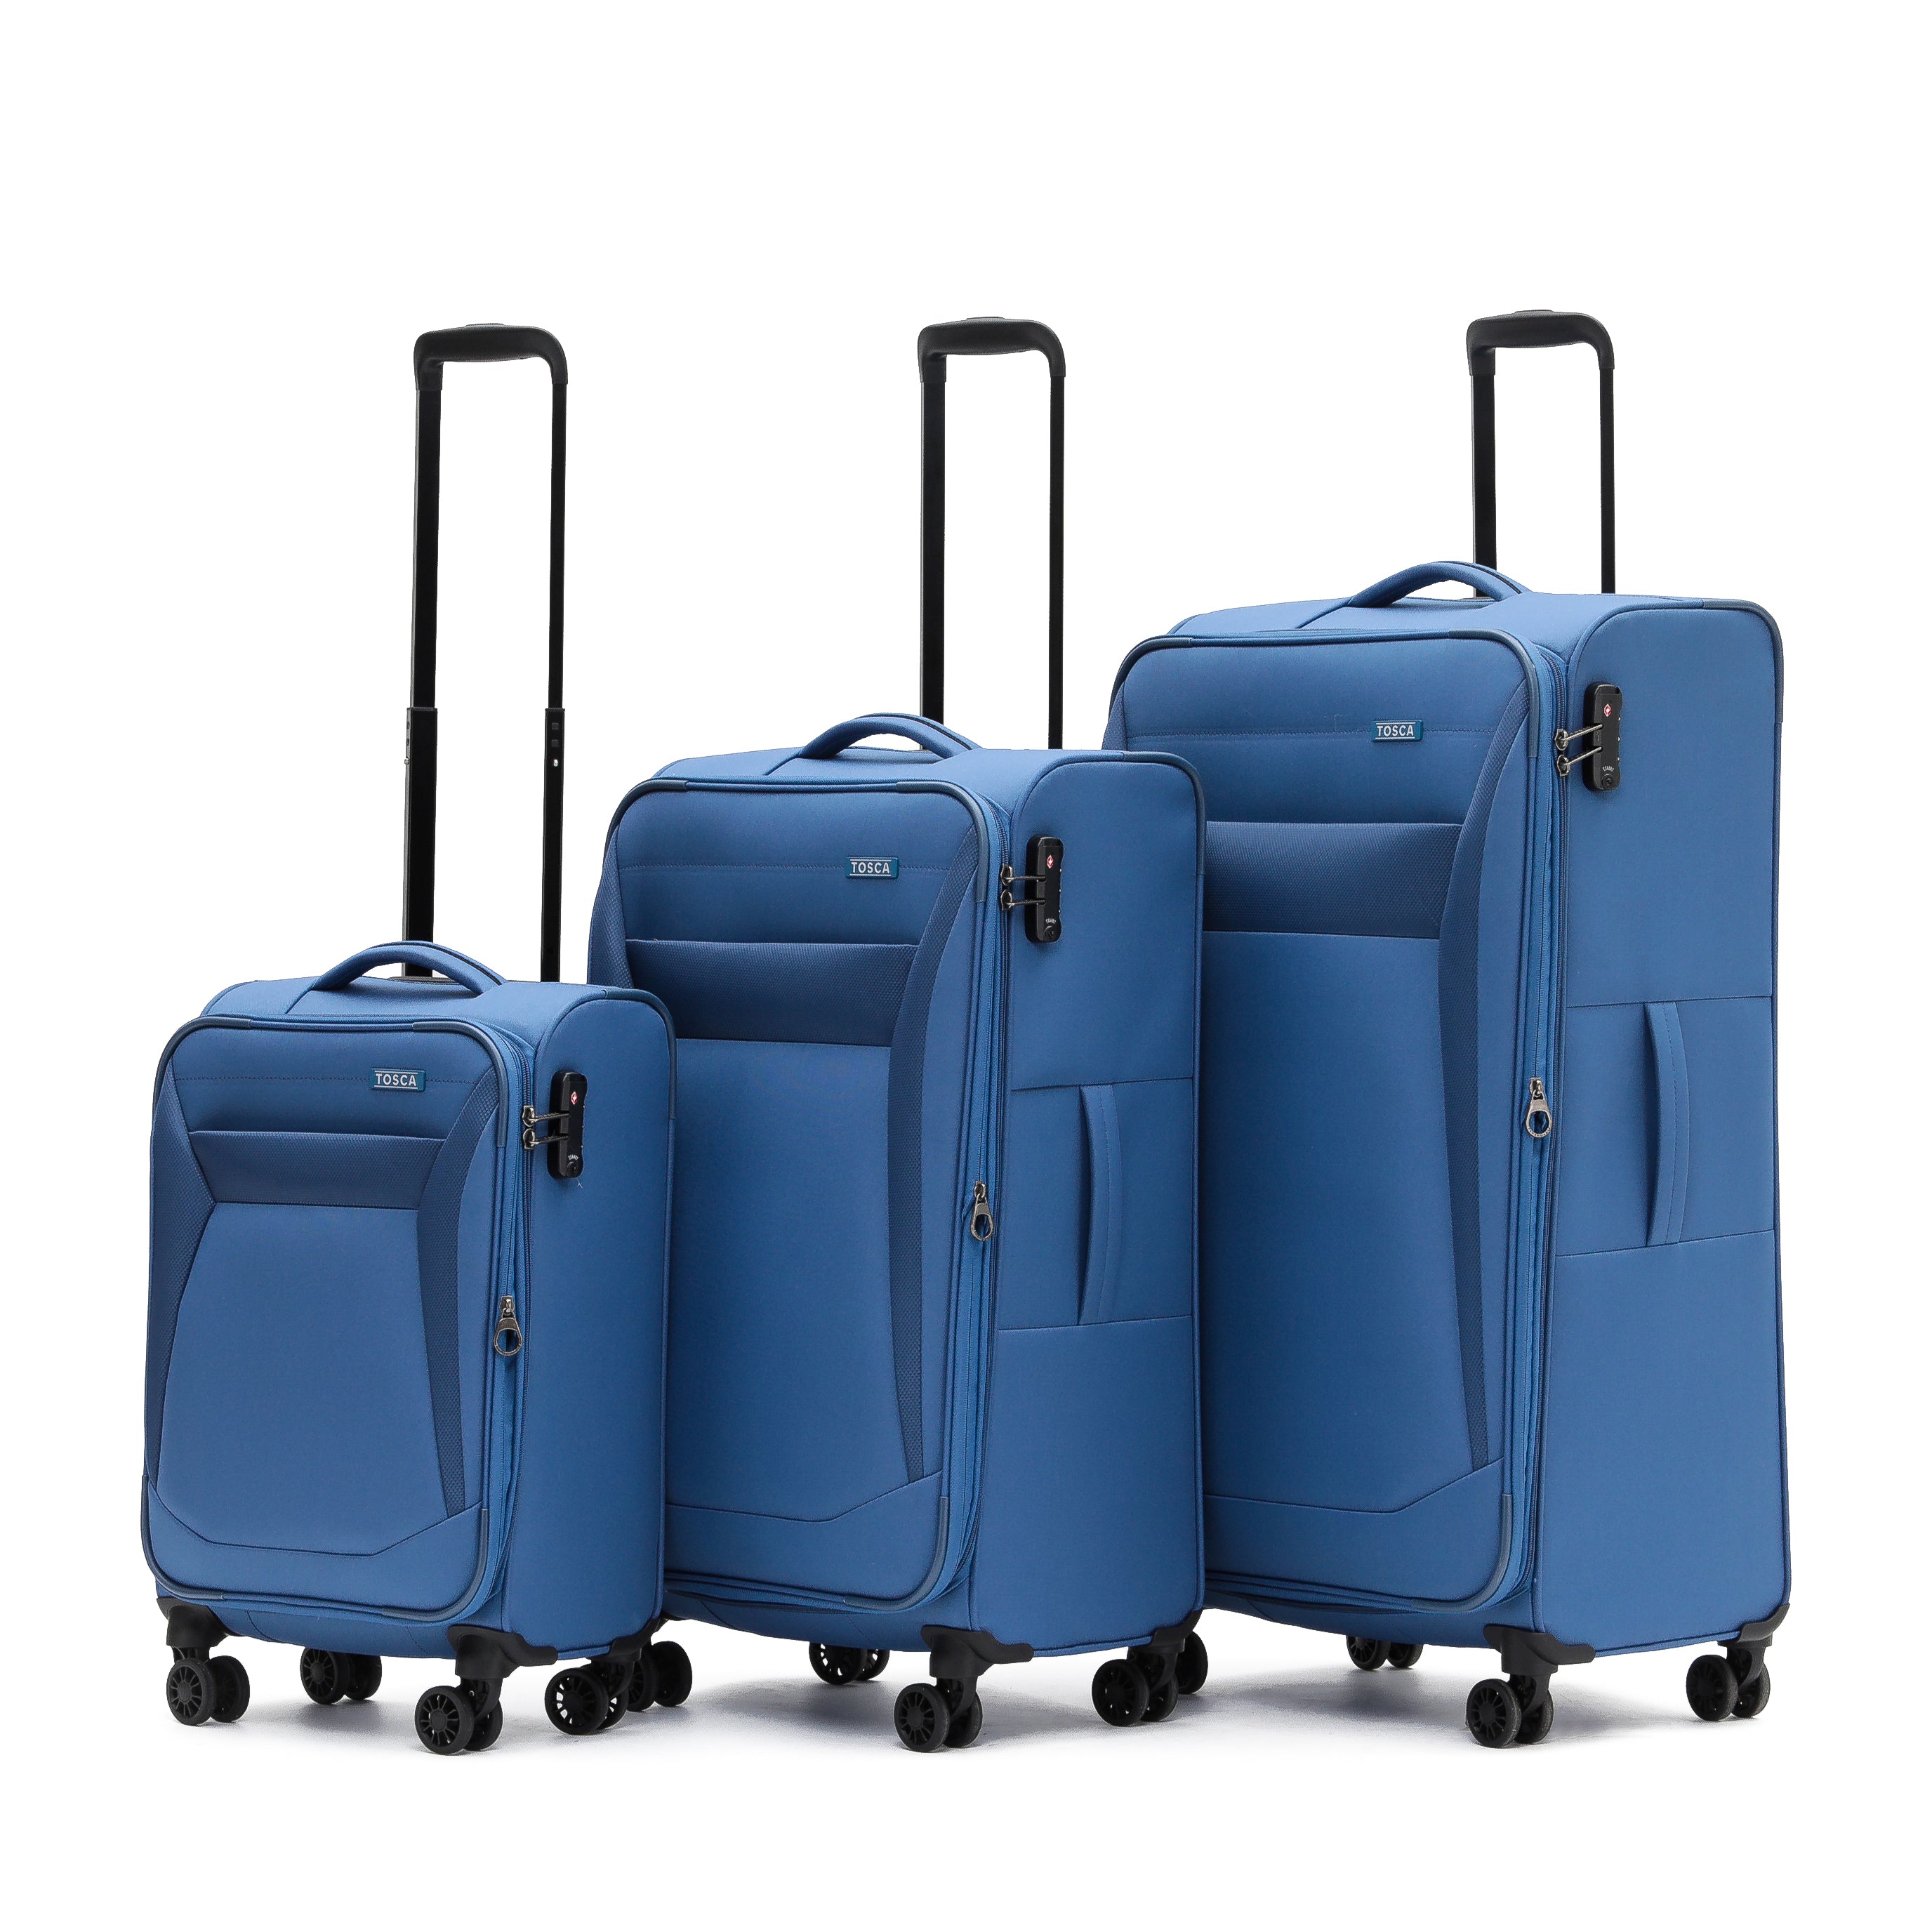 Tosca - Aviator 2.0 set of 3 suitcases (L-M-S) - Blue-1